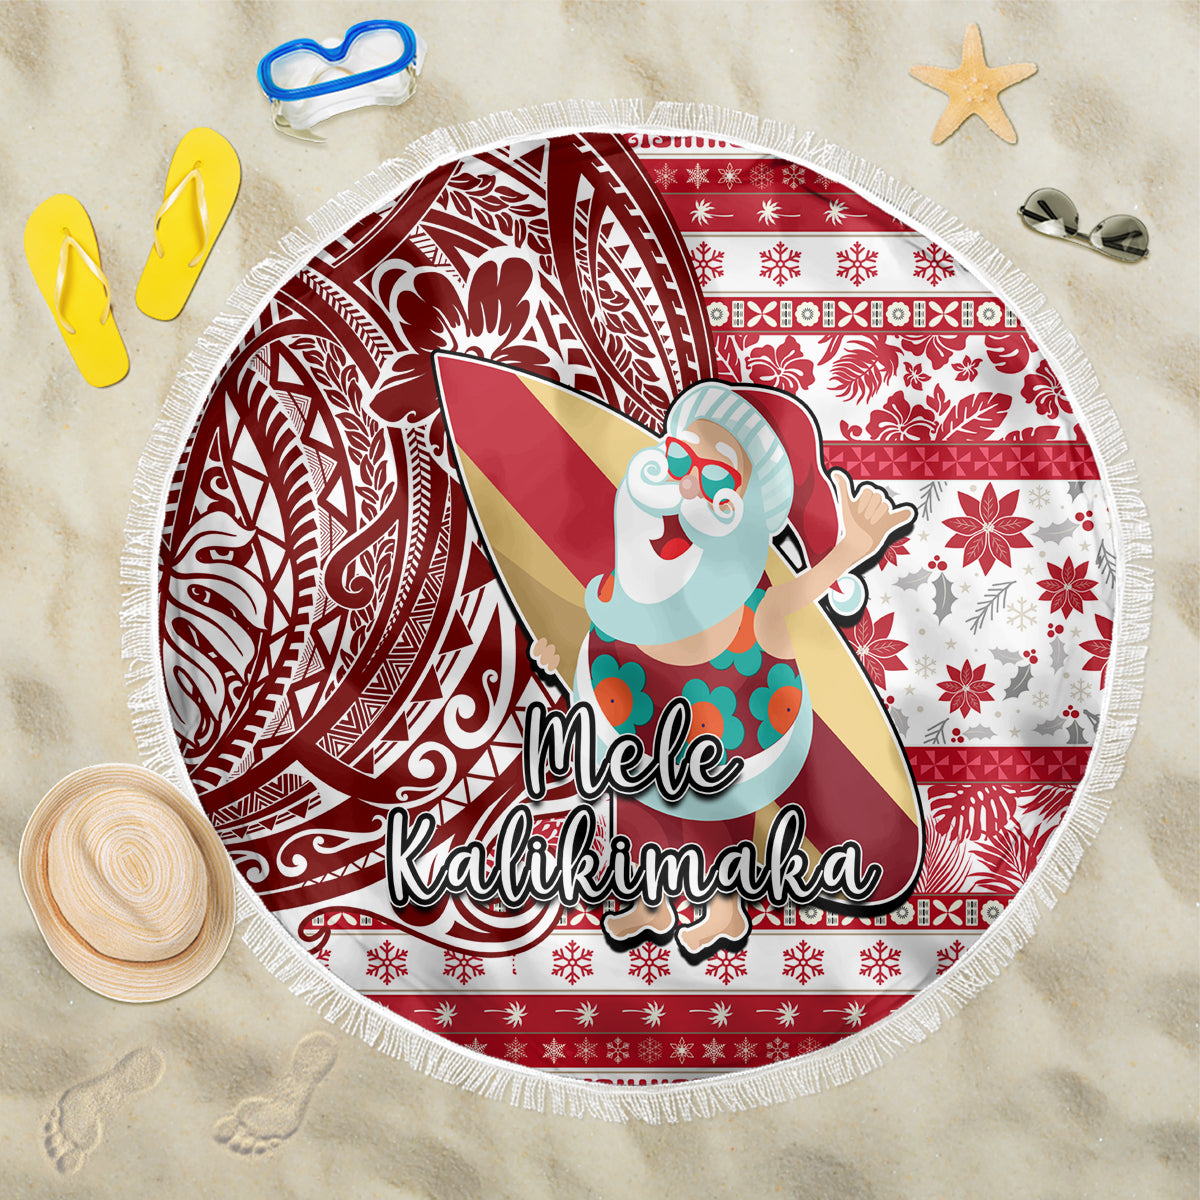 Hawaii Mele Kalikimaka Beach Blanket Santa Claus Surfing with Hawaiian Pattern Striped Red Style LT03 One Size 150cm Red - Polynesian Pride